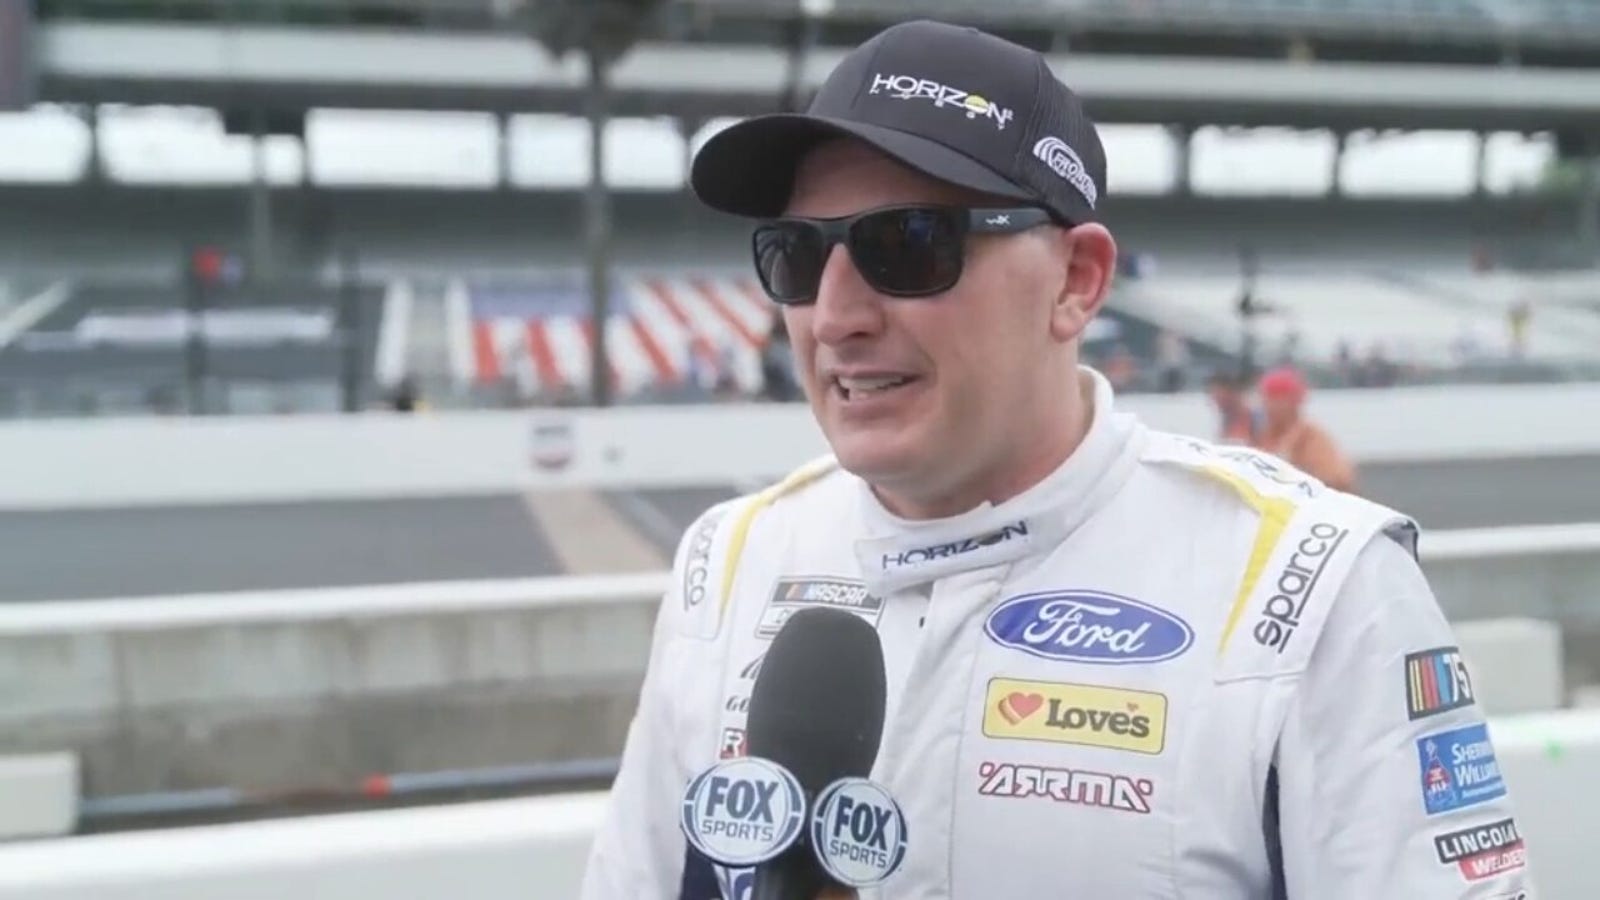 Michael McDowell reflects on his second career win